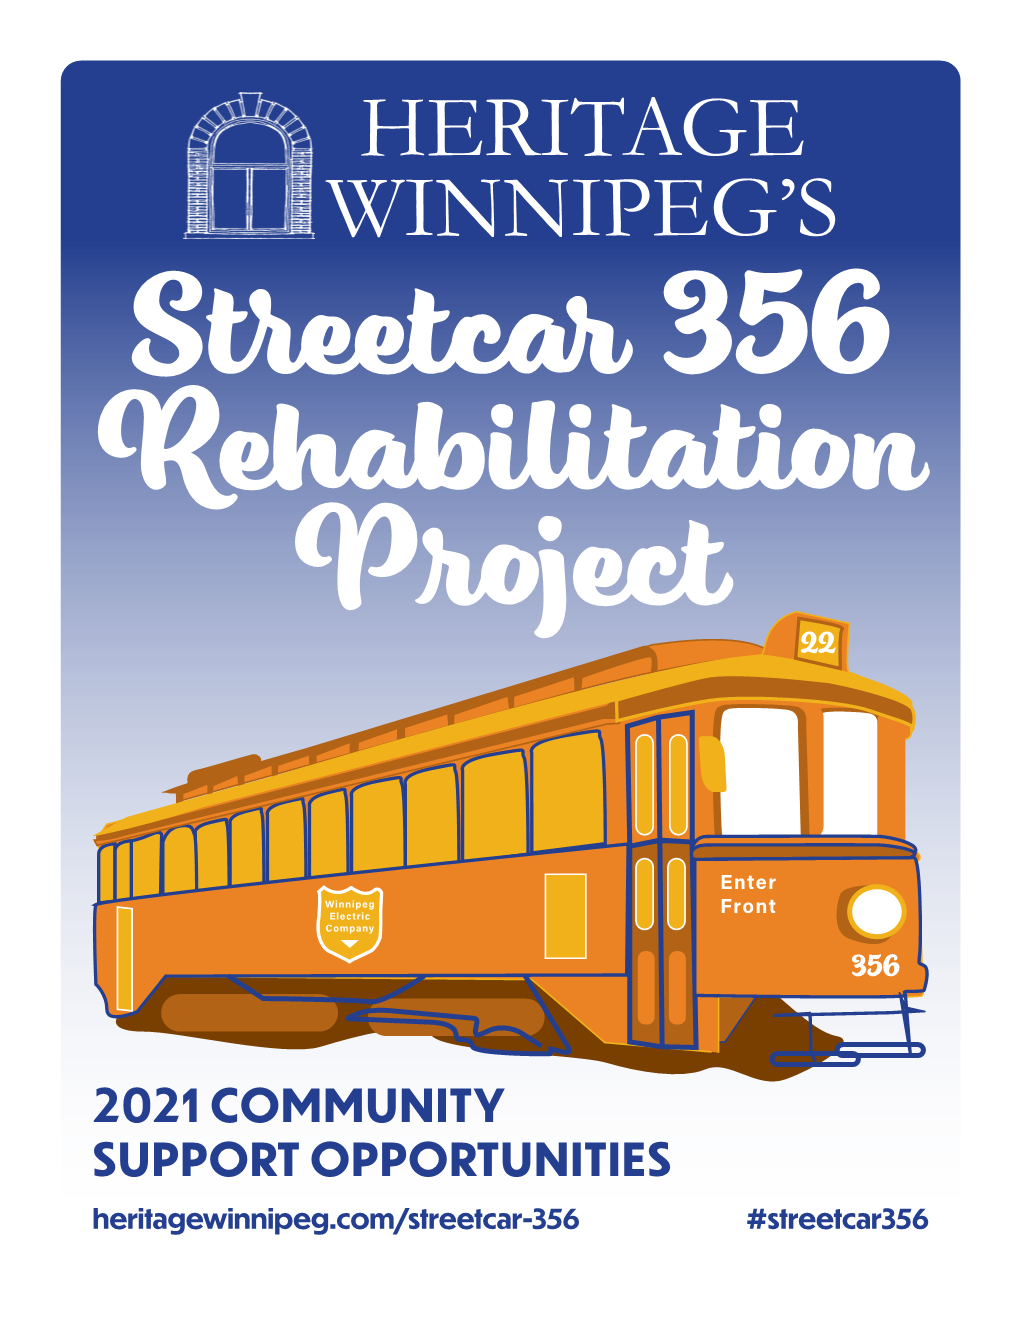 View the Streetcar 356 Sponsorship Guide to Learn More